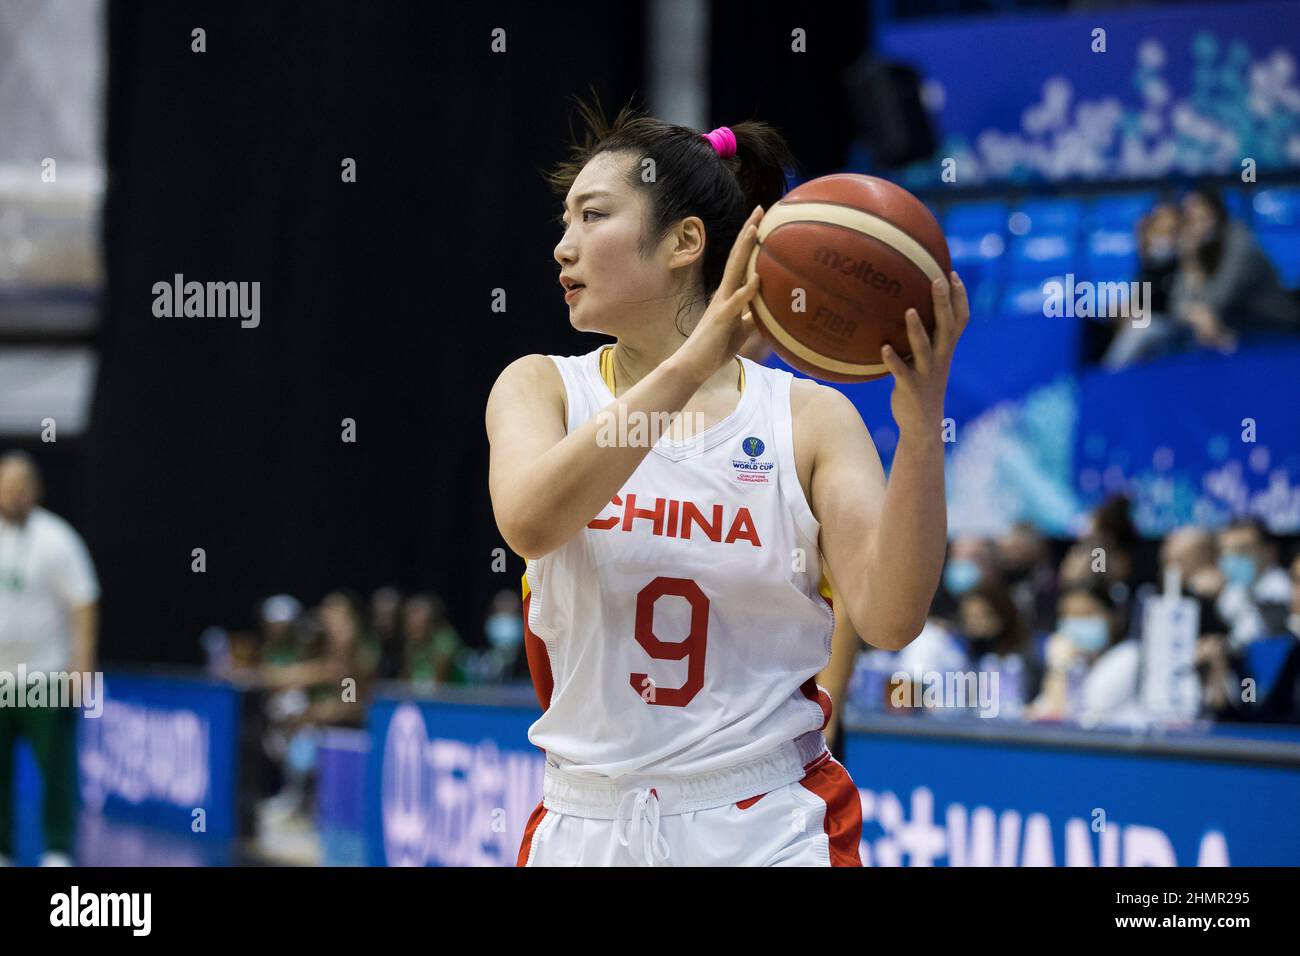 Belgrade, Serbia, 10th February 2022. Meng Li of China in action during the FIBA Women's Basketball World Cup Qualifying Tournament match between China v Nigeria in Belgrade, Serbia. February 10, 2022. Credit: Nikola Krstic/Alamy Stock Photo